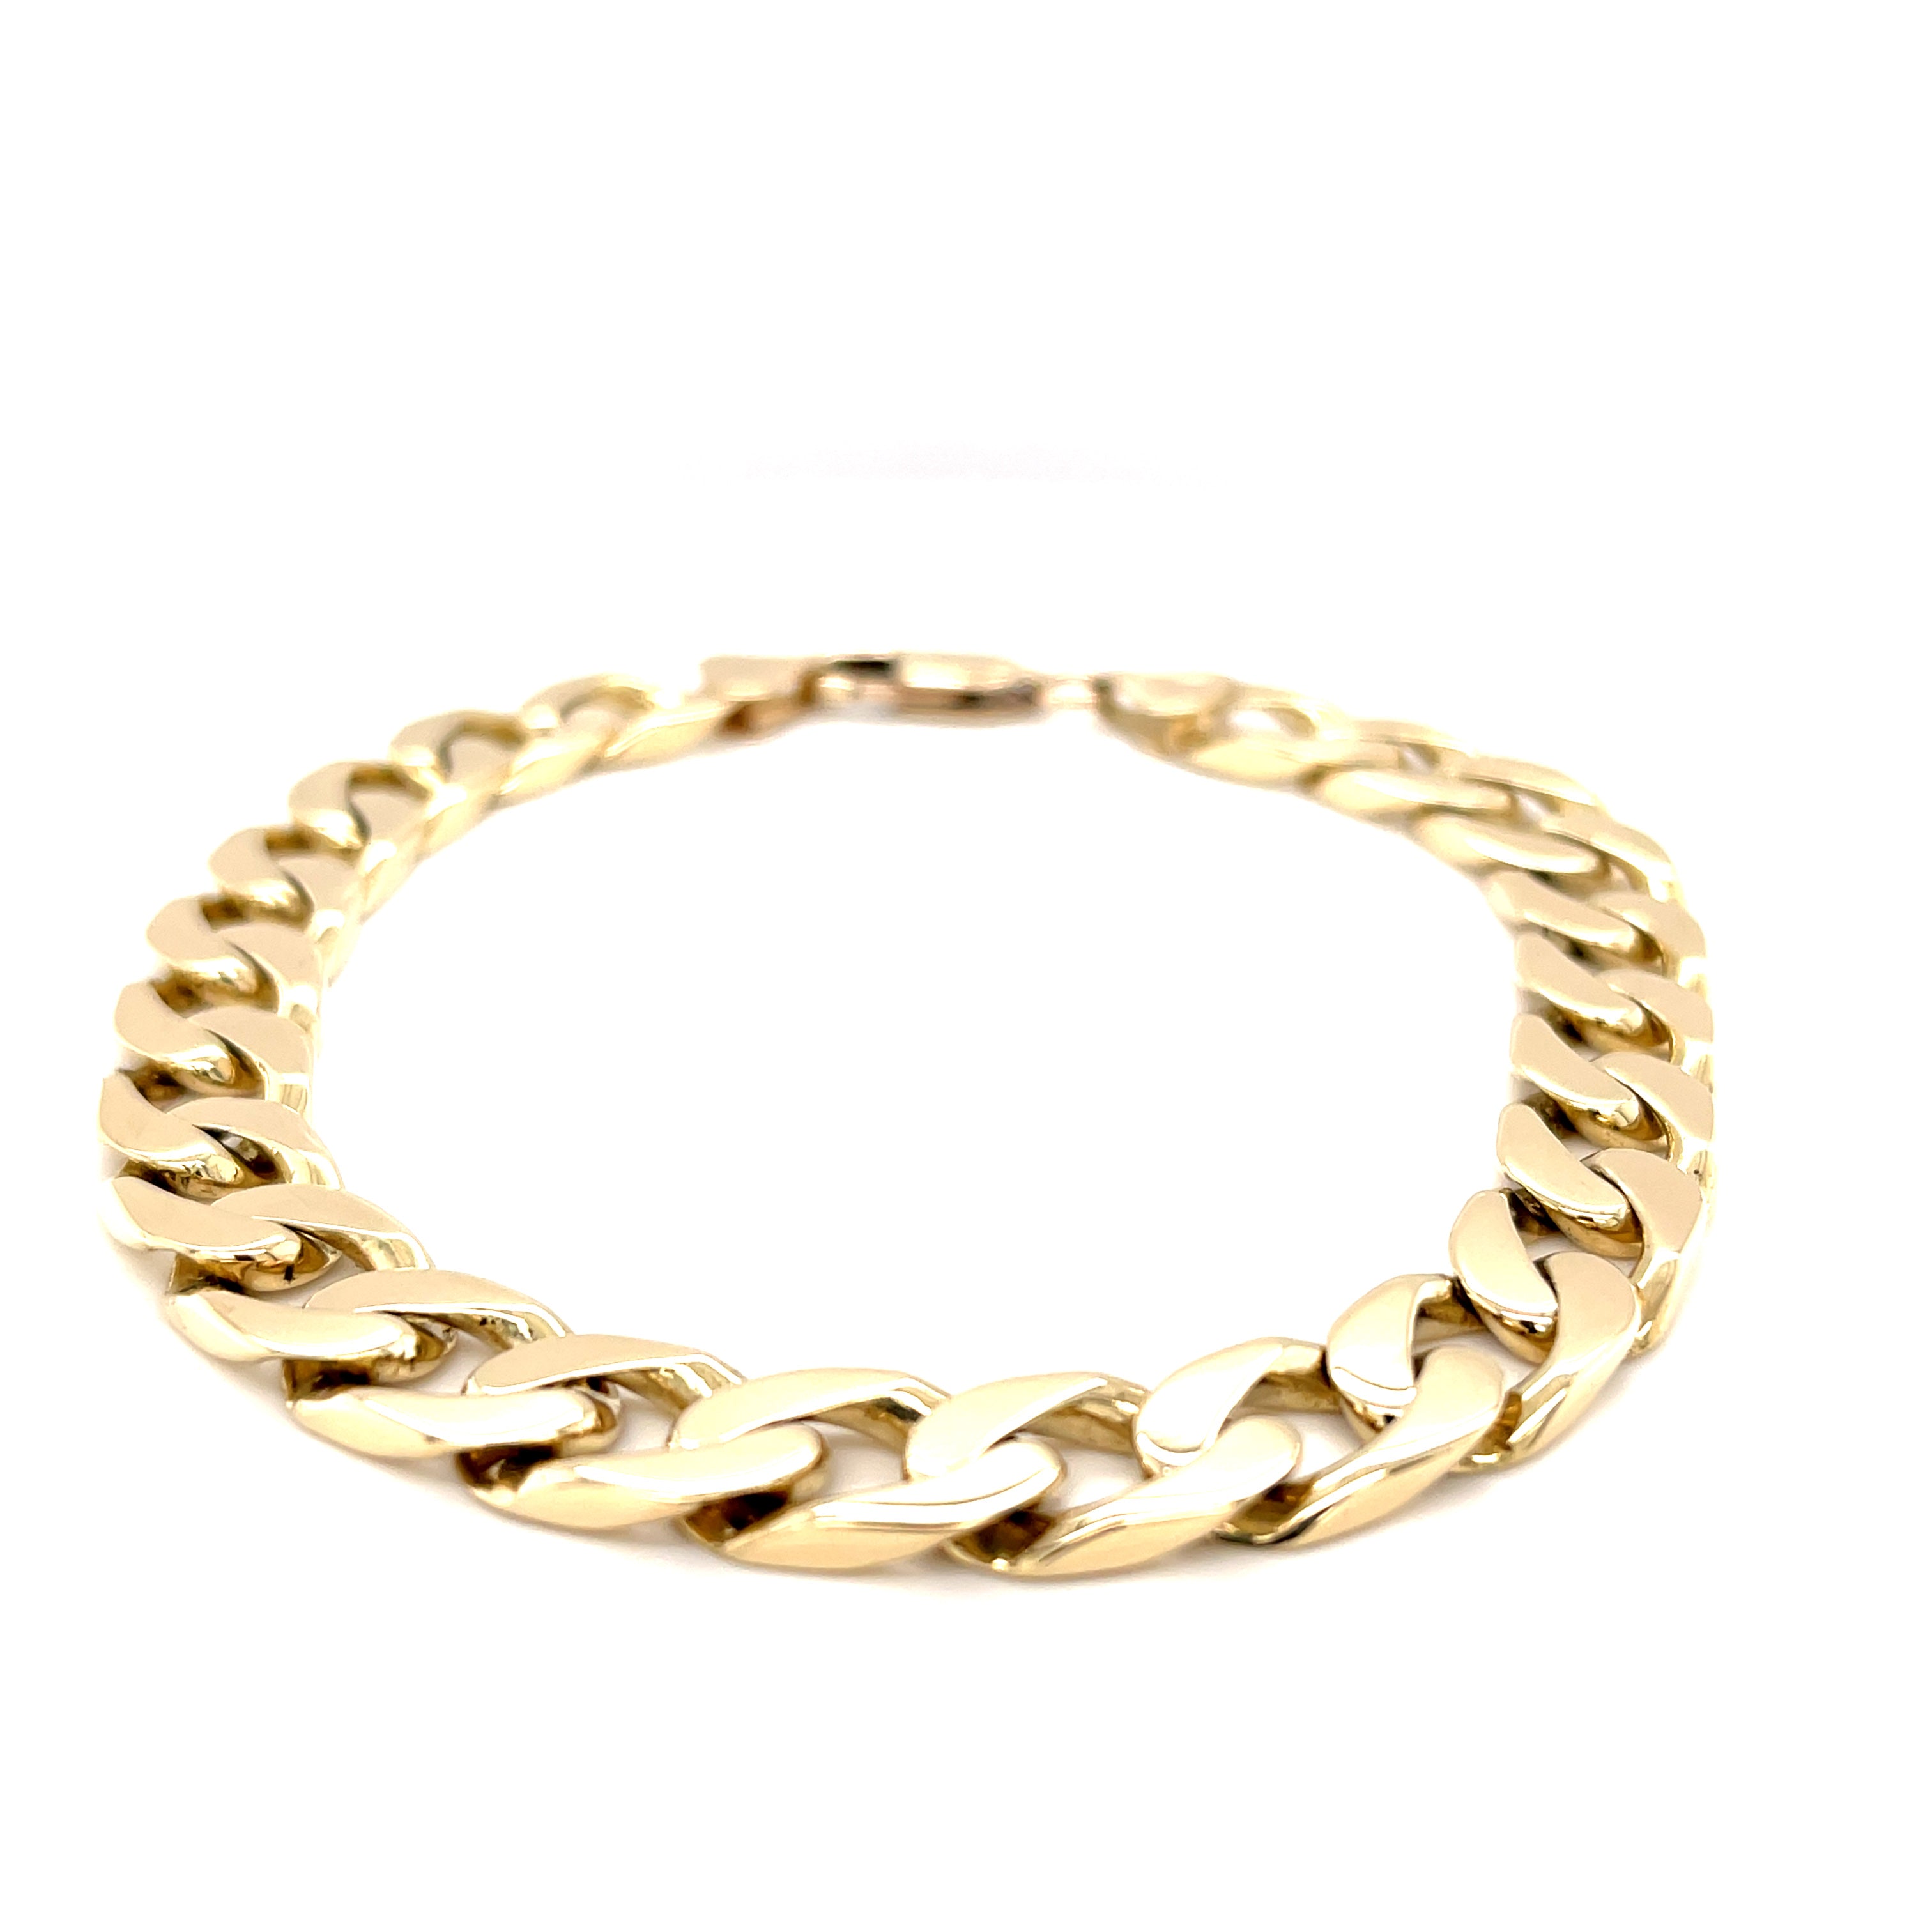 9ct Yellow Gold 9.50" Flat Edge Curb Link Bracelet - 34.00g SOLD